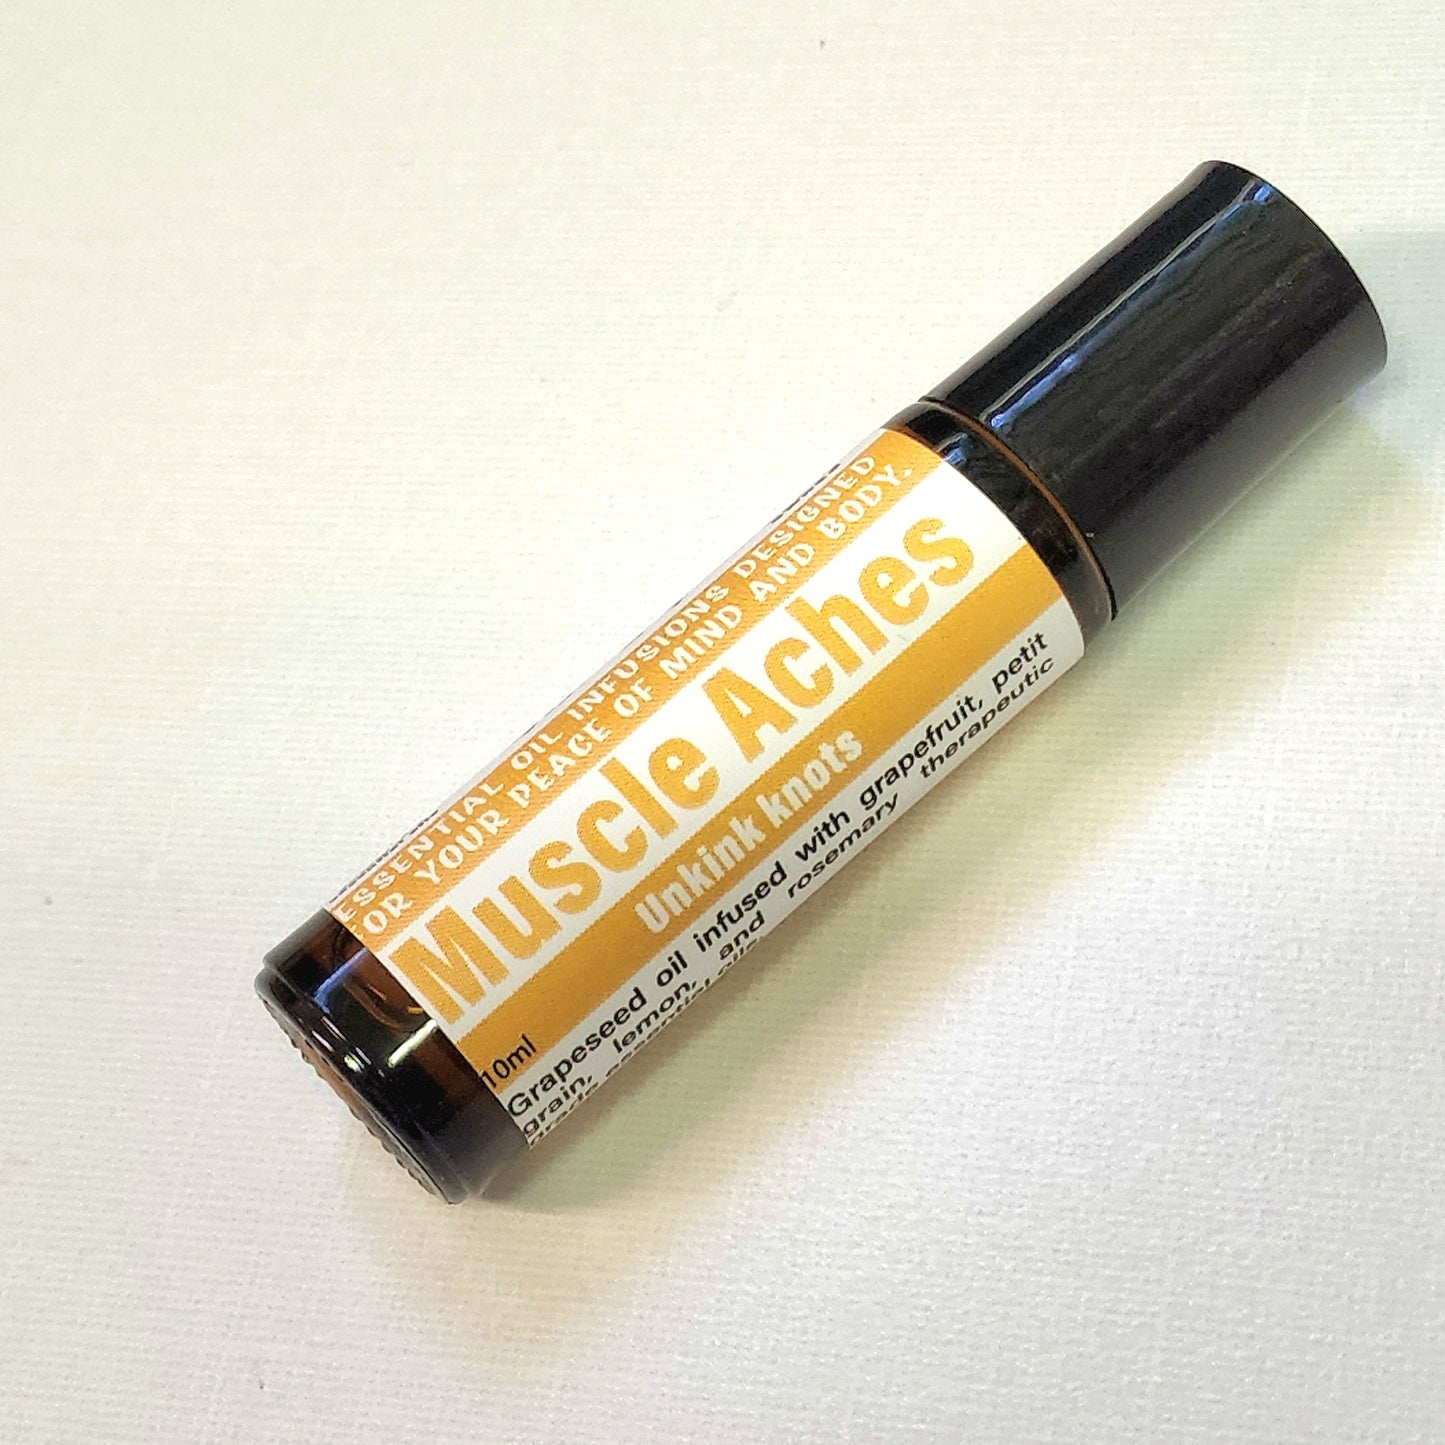 Muscle Aches Roll-on Perfumed oil